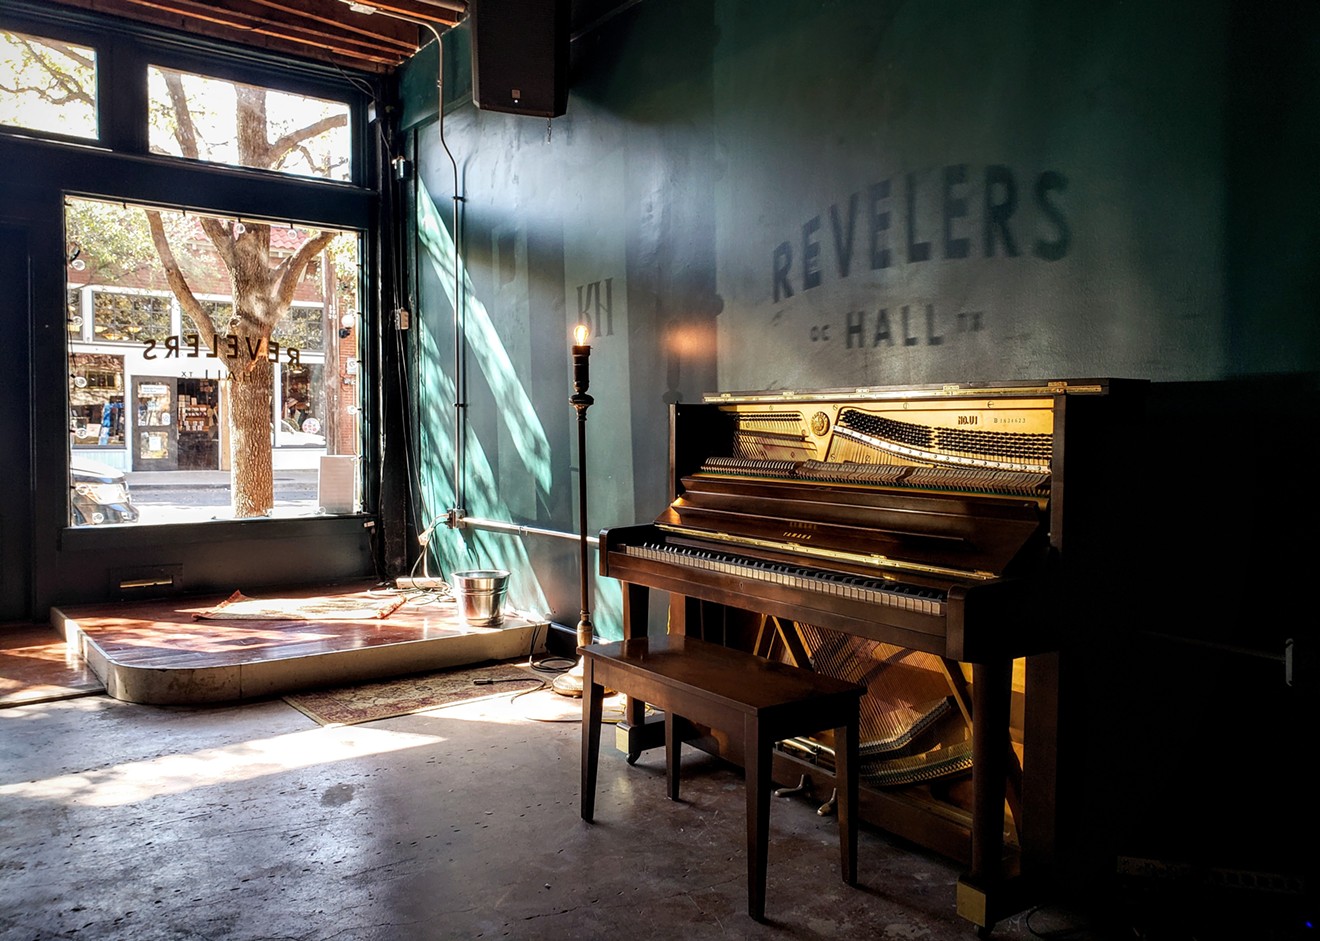 Revelers Hall is an old-timey haven for vagabonds and jazz cats.